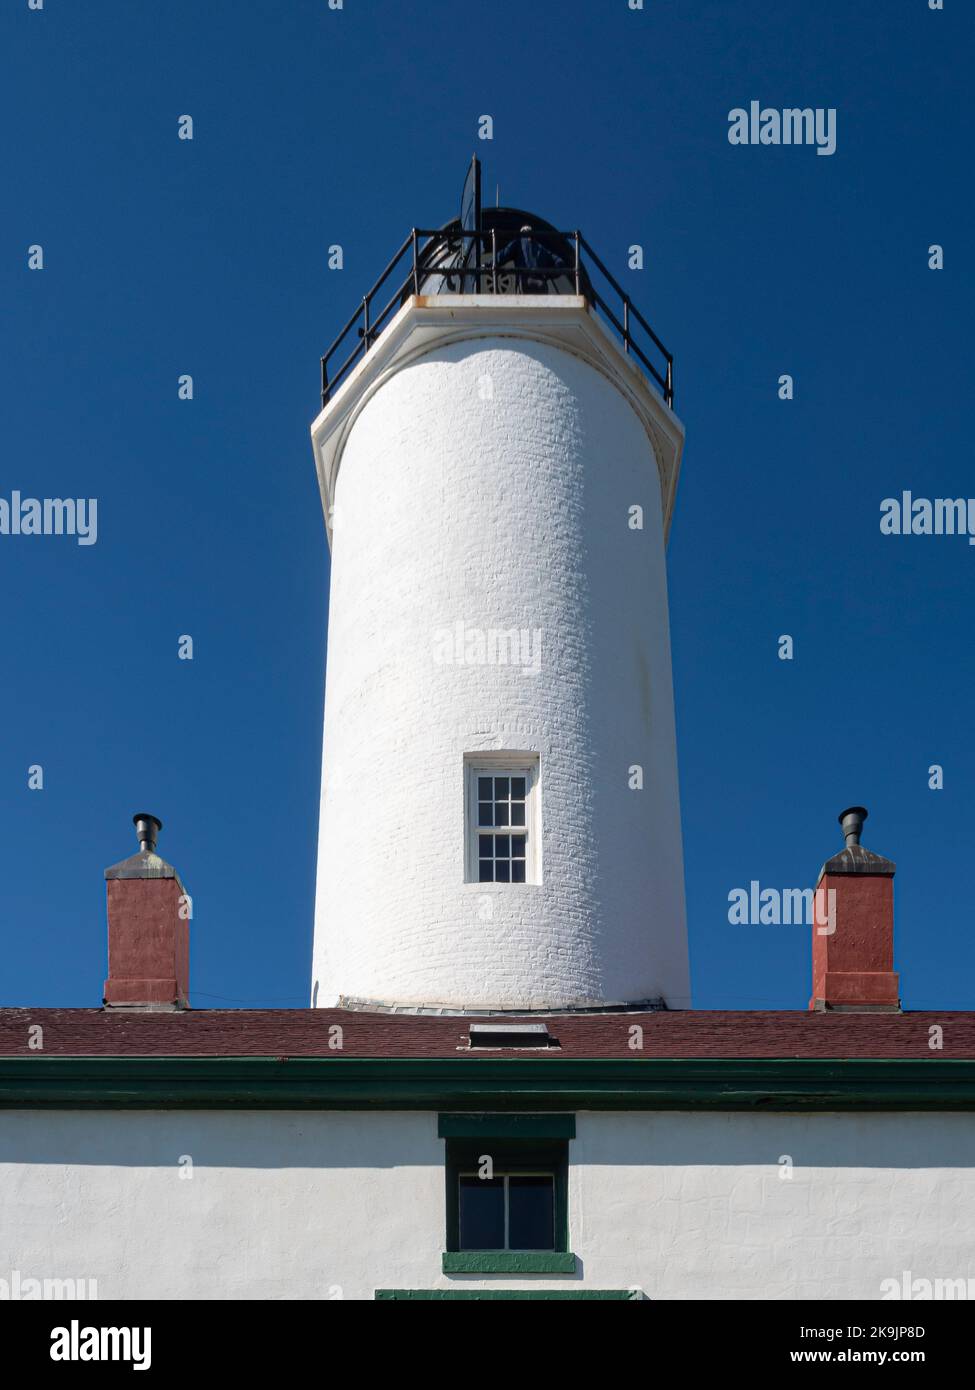 WA22636-00...WASHINGTON - Tower on the New Dungeness Lighthouse on the Strait of Juan de Fuca in the Dungeness National Wildlife Refuge. Stock Photo